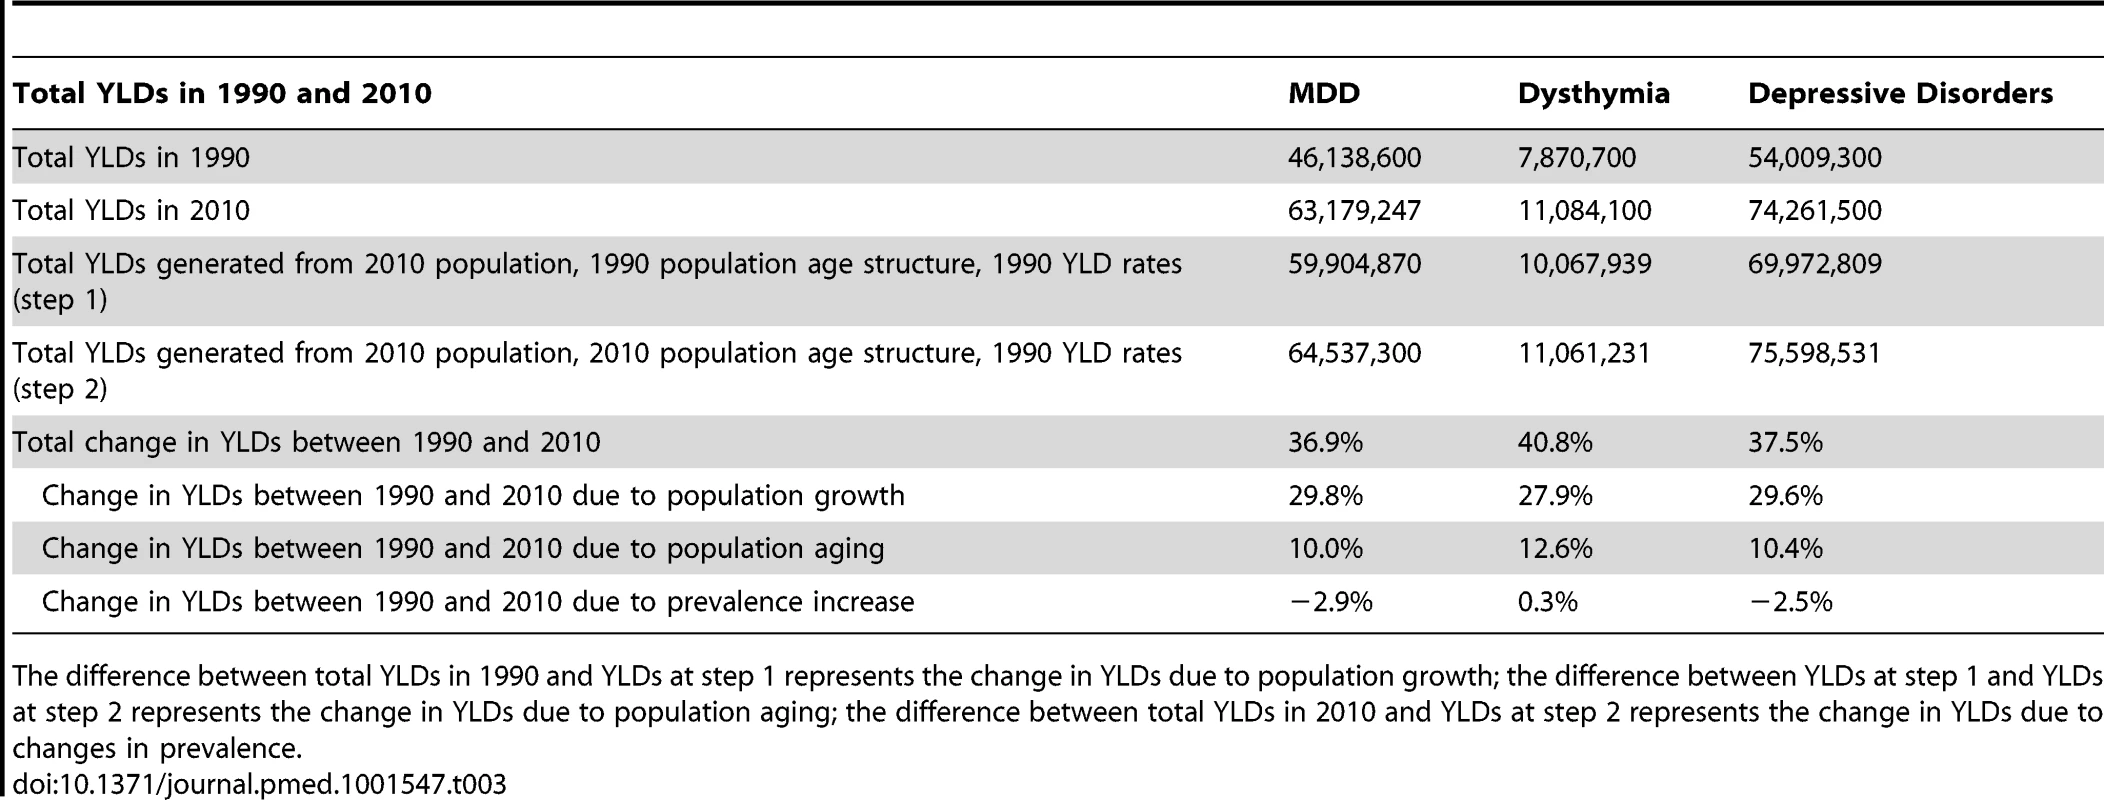 Change in depressive disorder YLDs between 1990 and 2010.